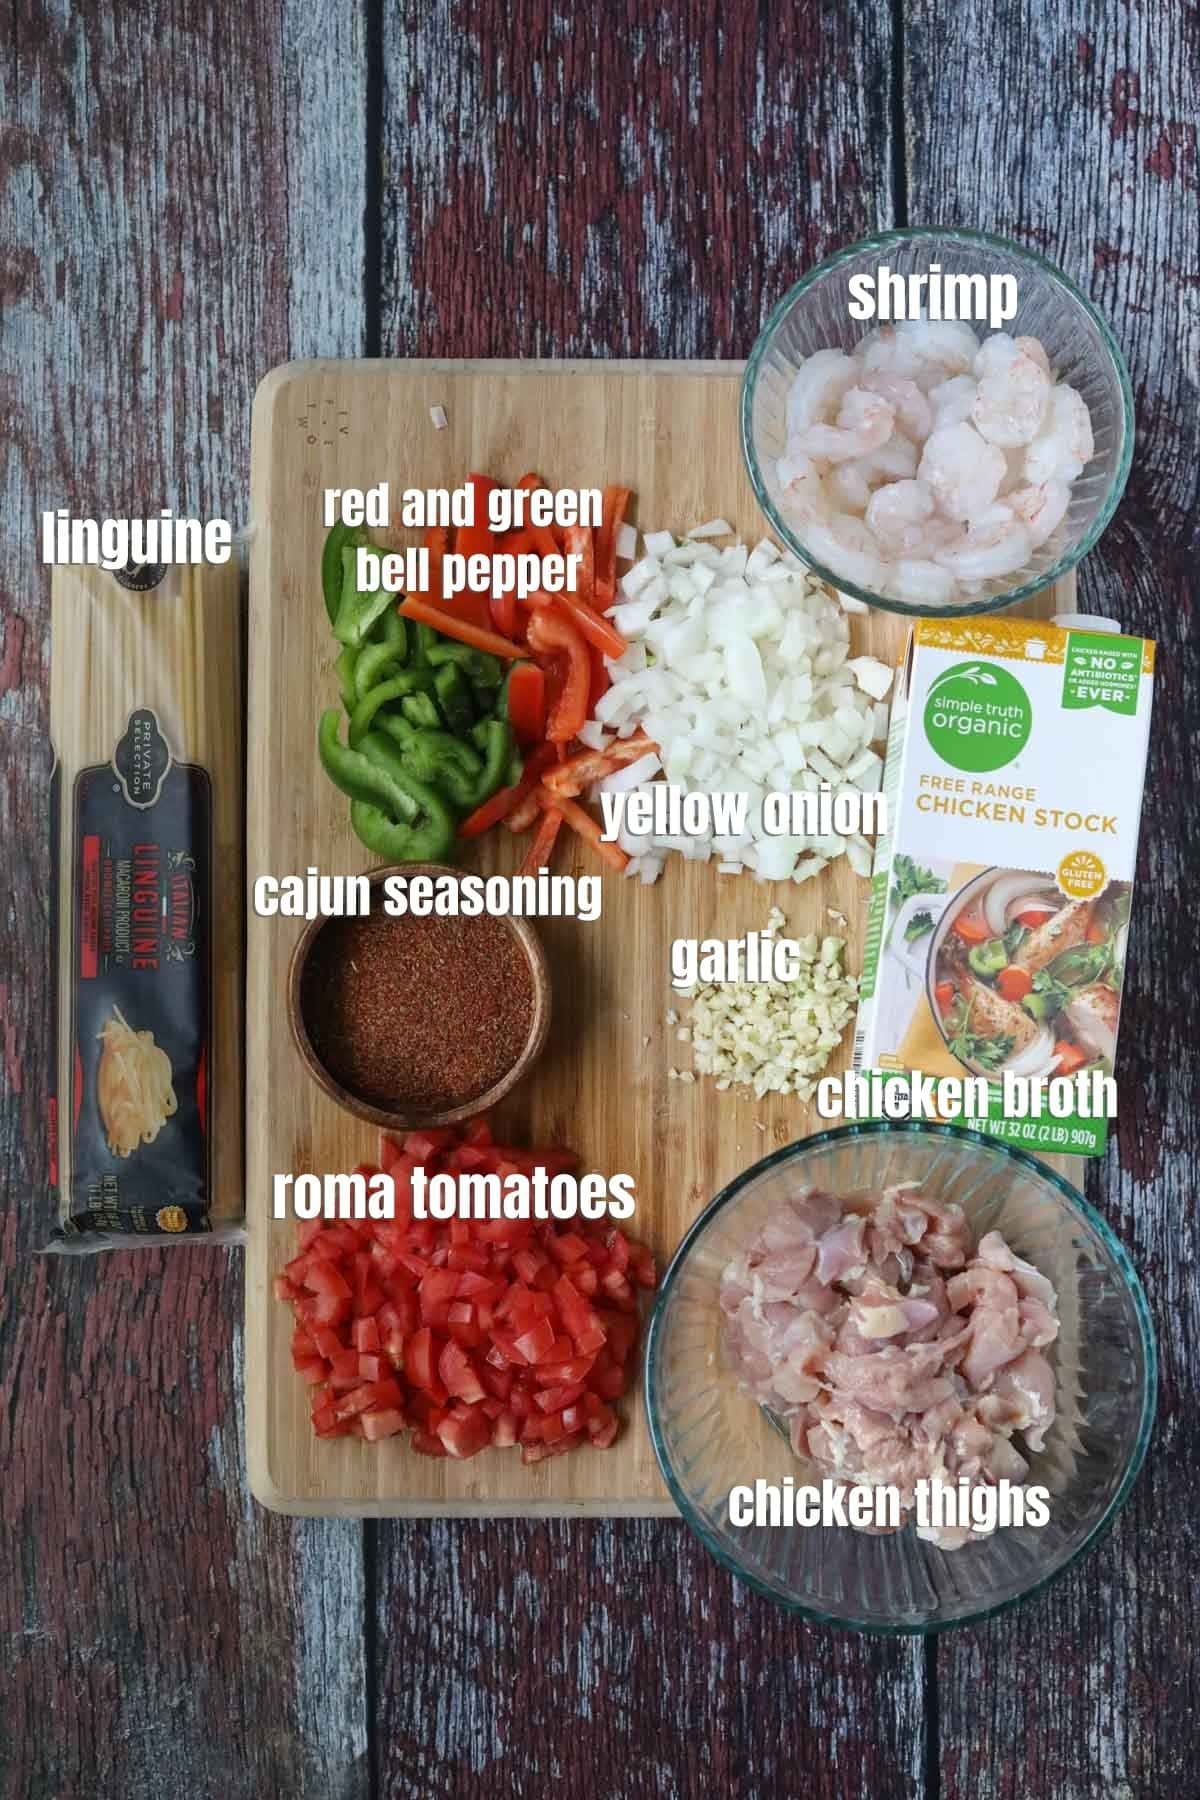 Ingredients for making Cajun jambalaya pasta spread out on a wooden cutting board.